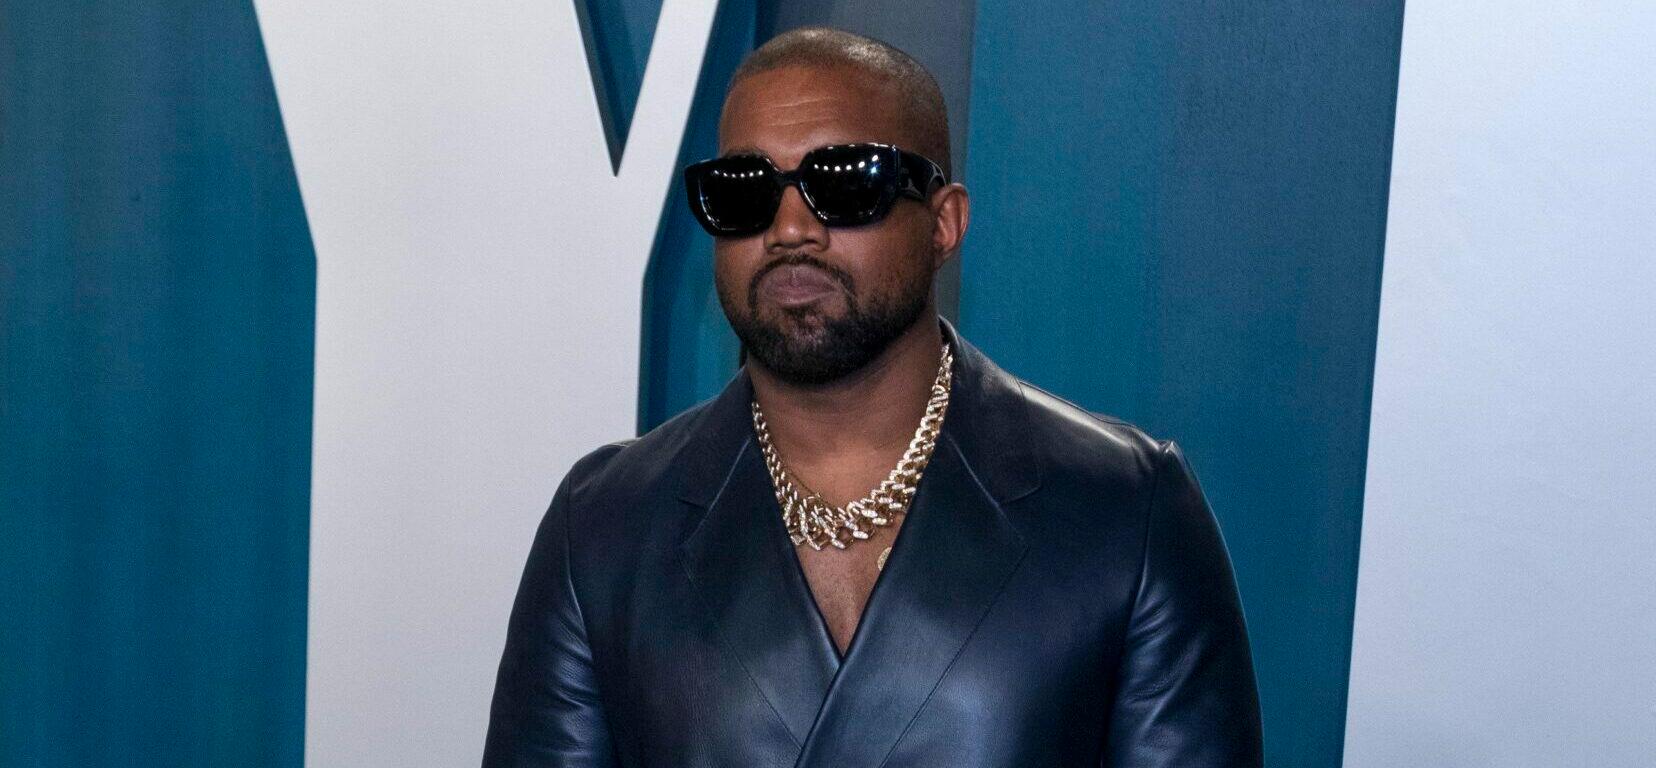 Kanye West Slammed Online For Singing About Sleeping With A ‘Jewish B—-‘